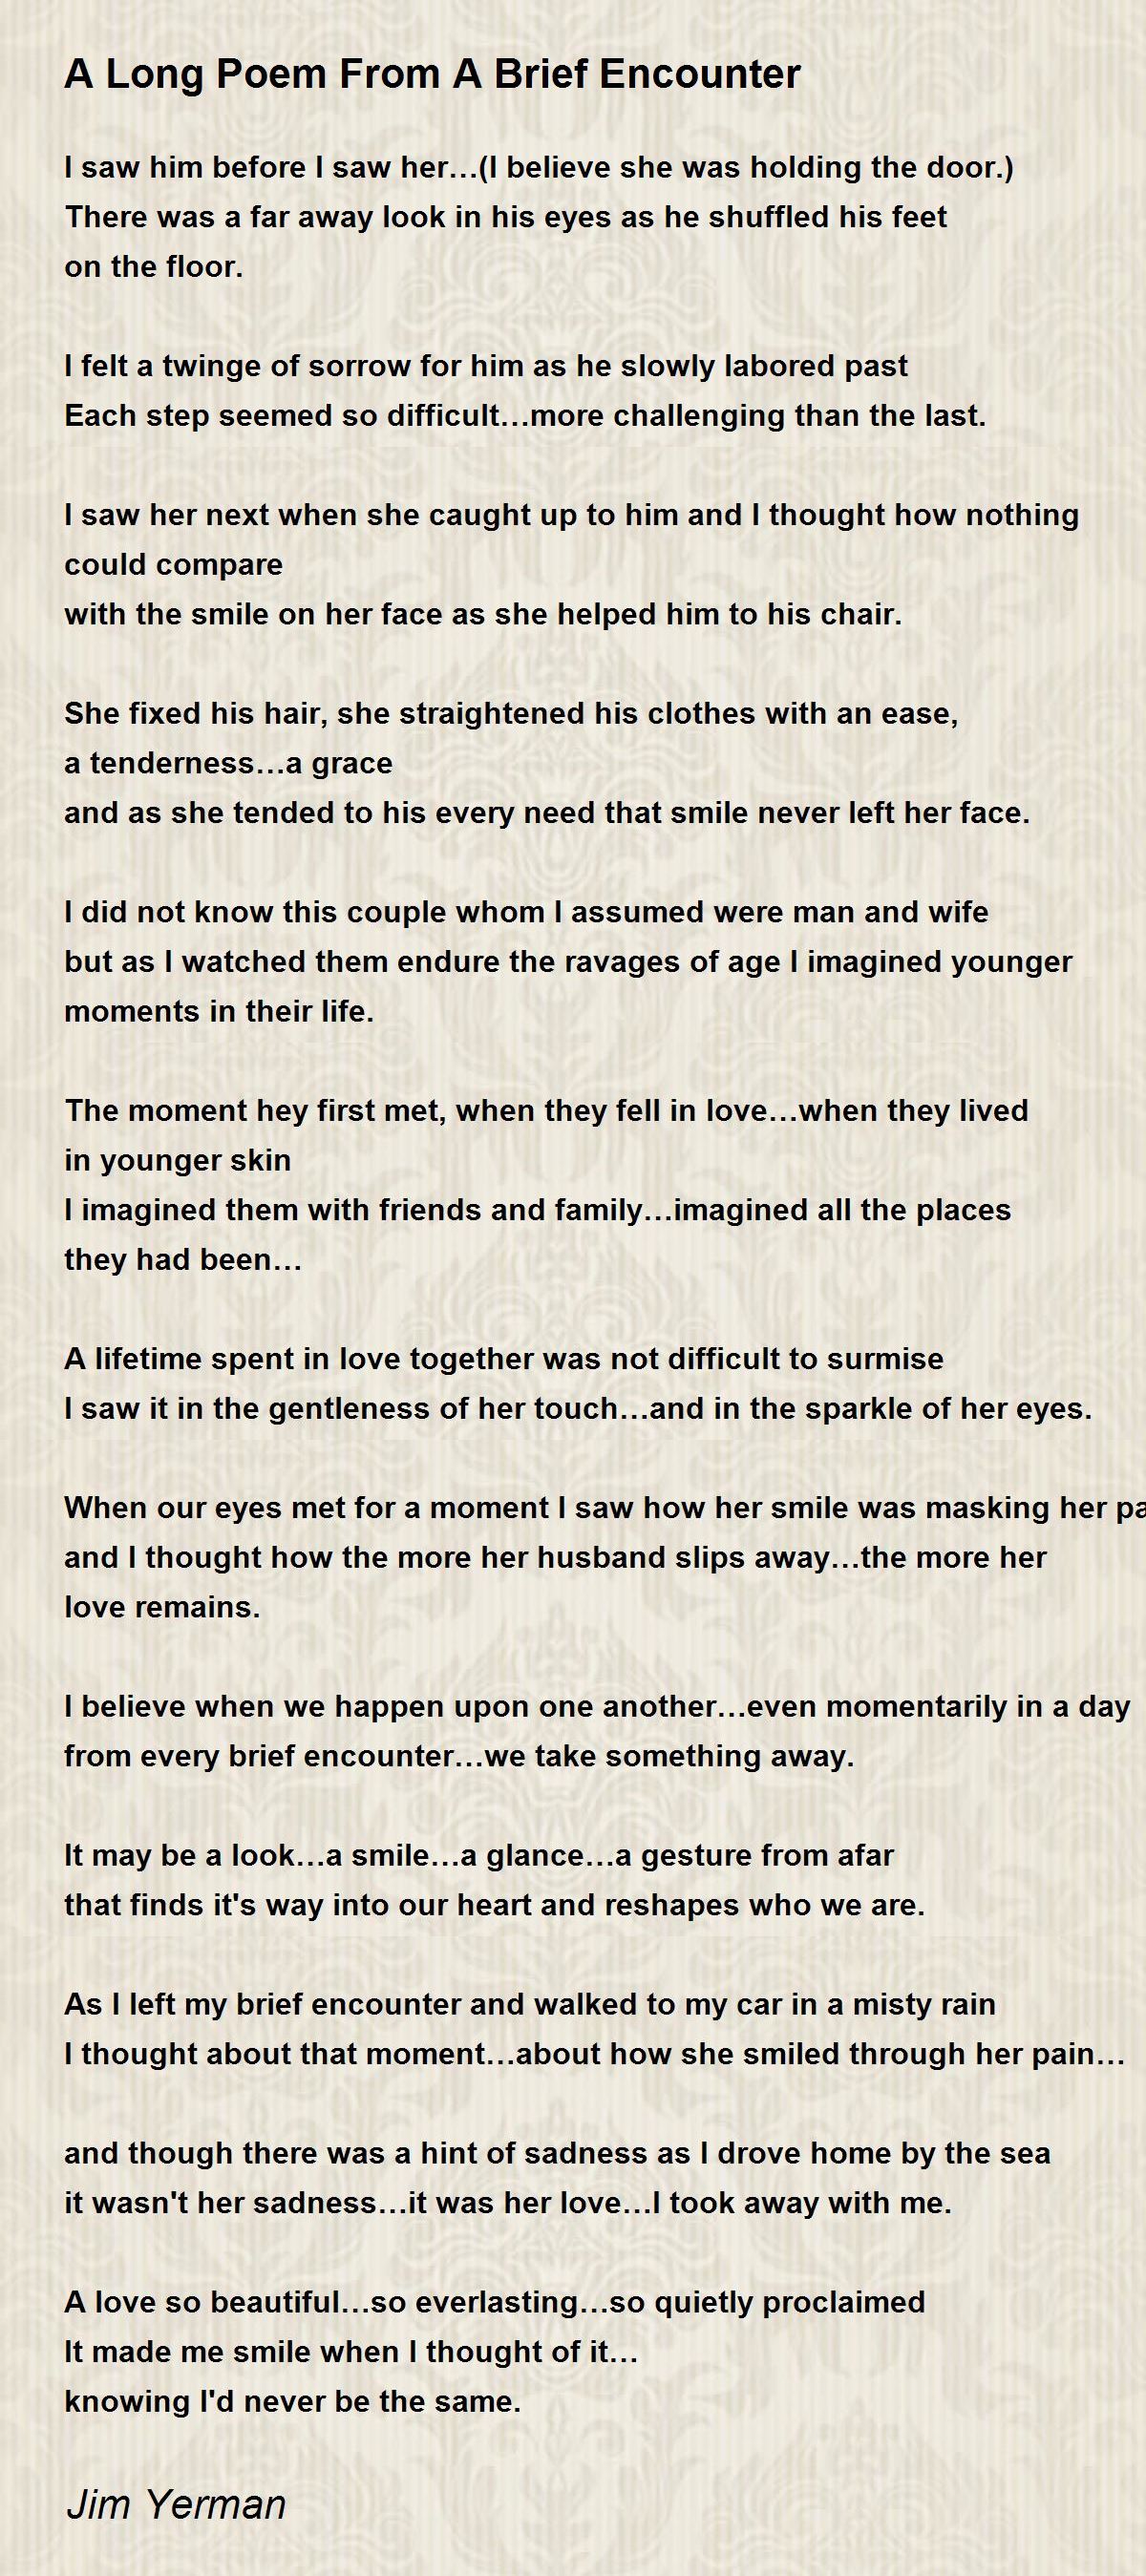 A Long Poem From A Brief Encounter by Jim Yerman - A Long Poem From A ...